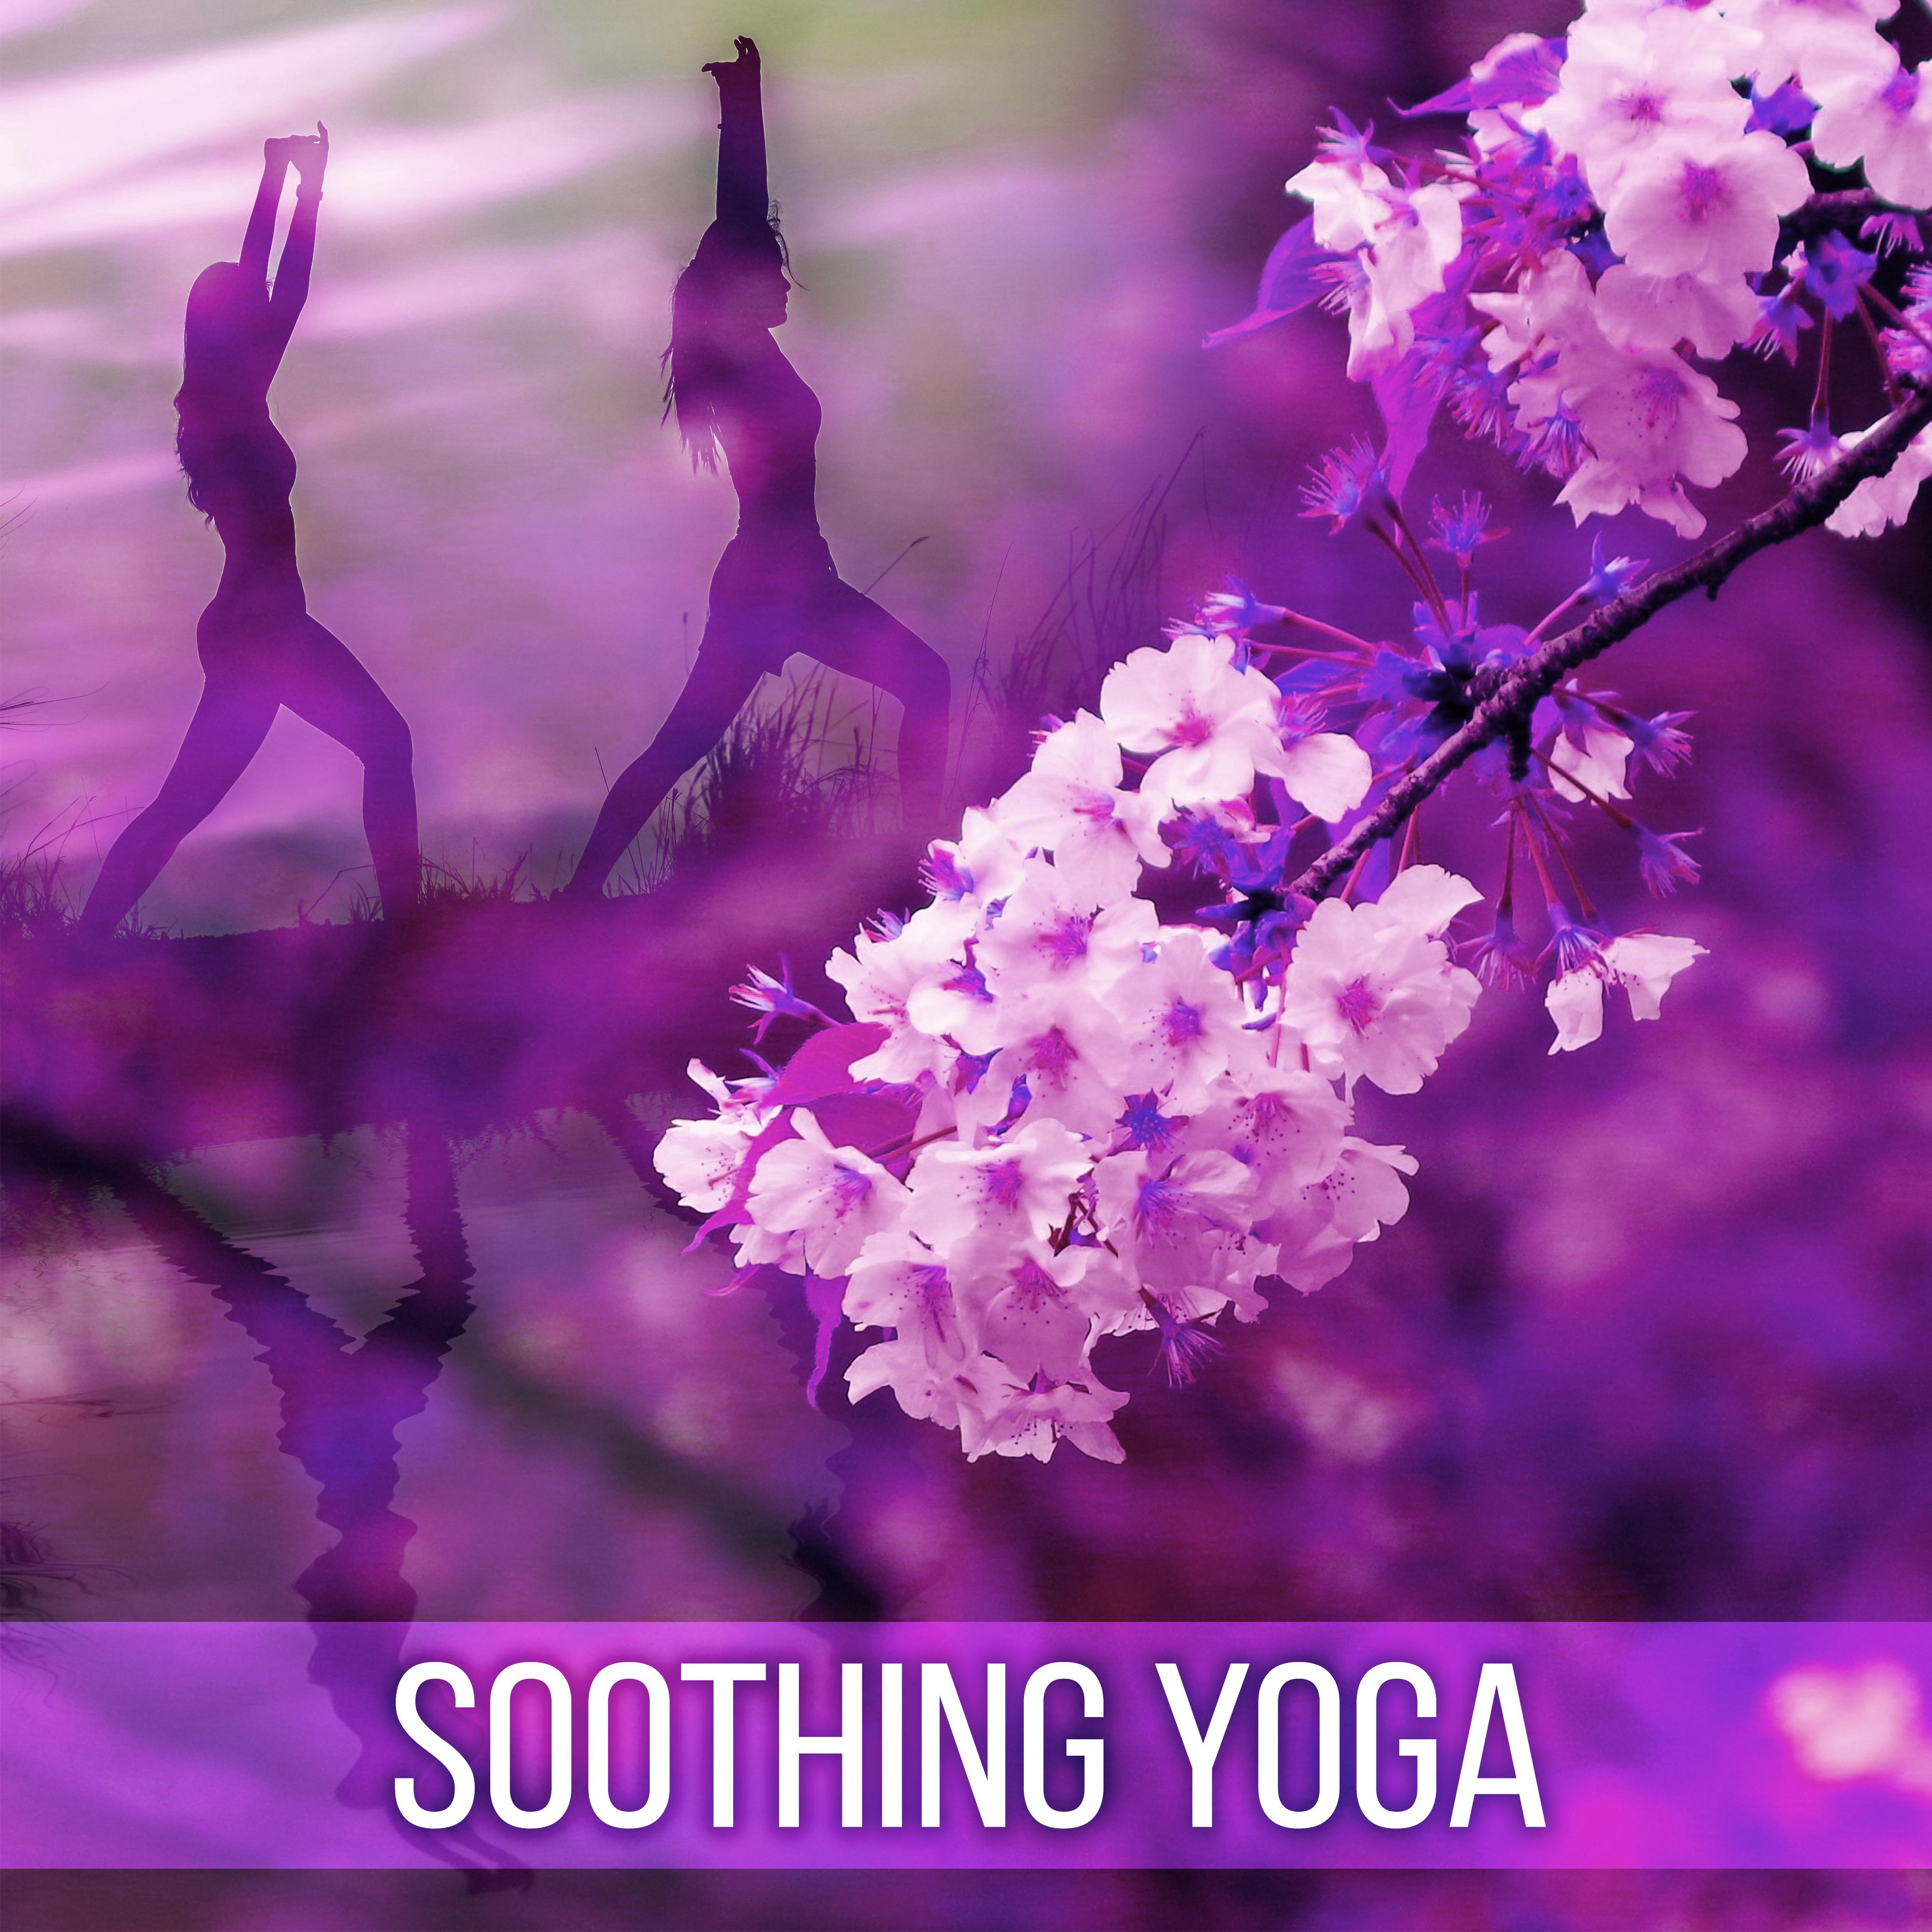 Soothing Yoga  Inner Calmness, Harmony, Music for Meditation, Chakra Balancing, Asian Zen, Stress Relief, Calm Down, Peaceful Mind, Training Yoga